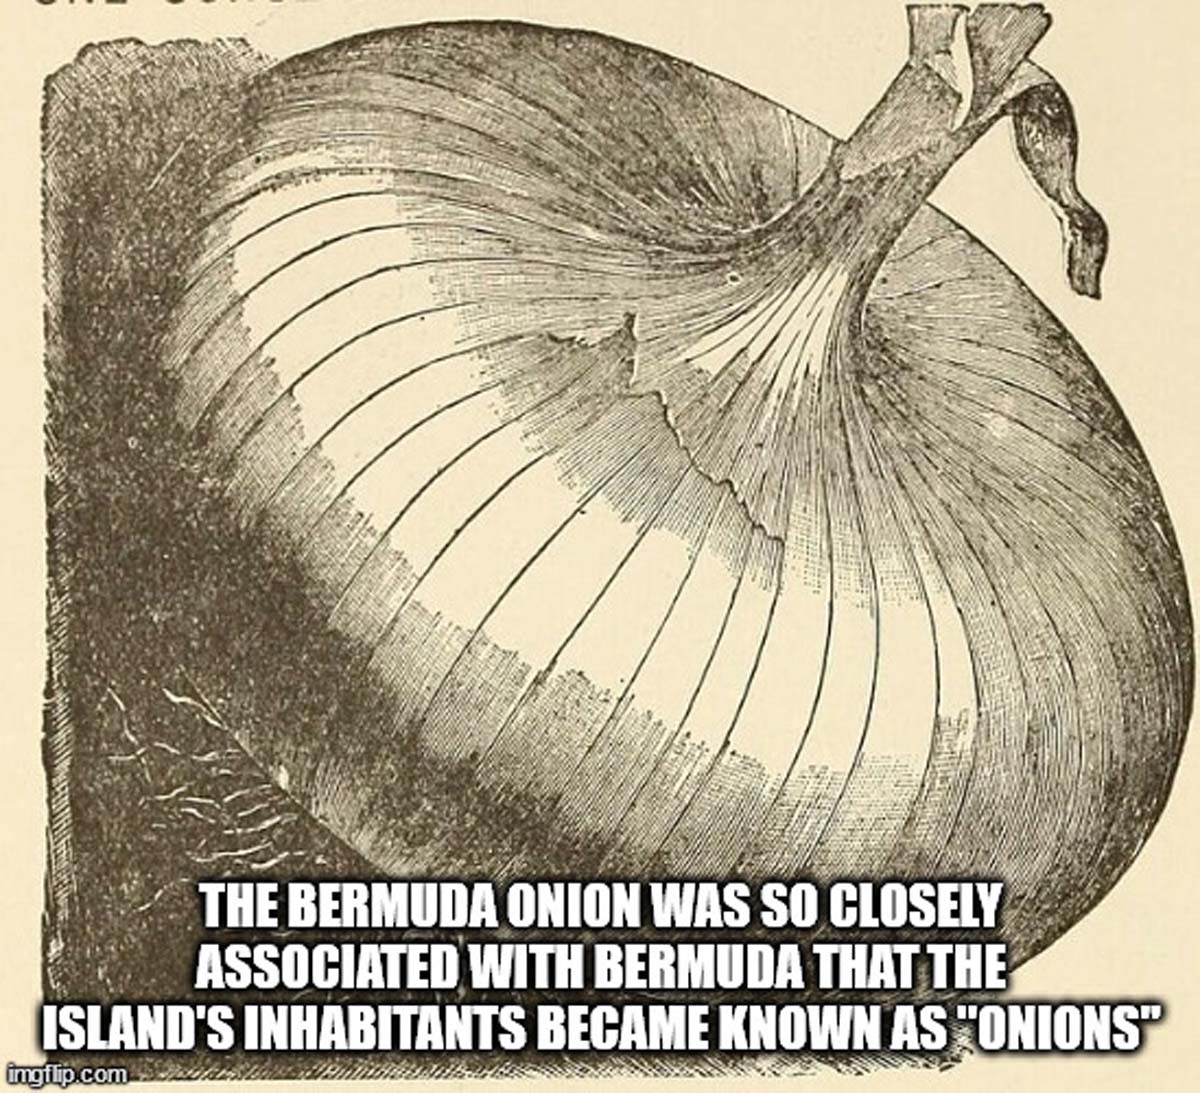 parrotfish - The Bermuda Onion Was So Closely Associated With Bermuda That The Island'S Inhabitants Became Known As "Onions" imgflip.com